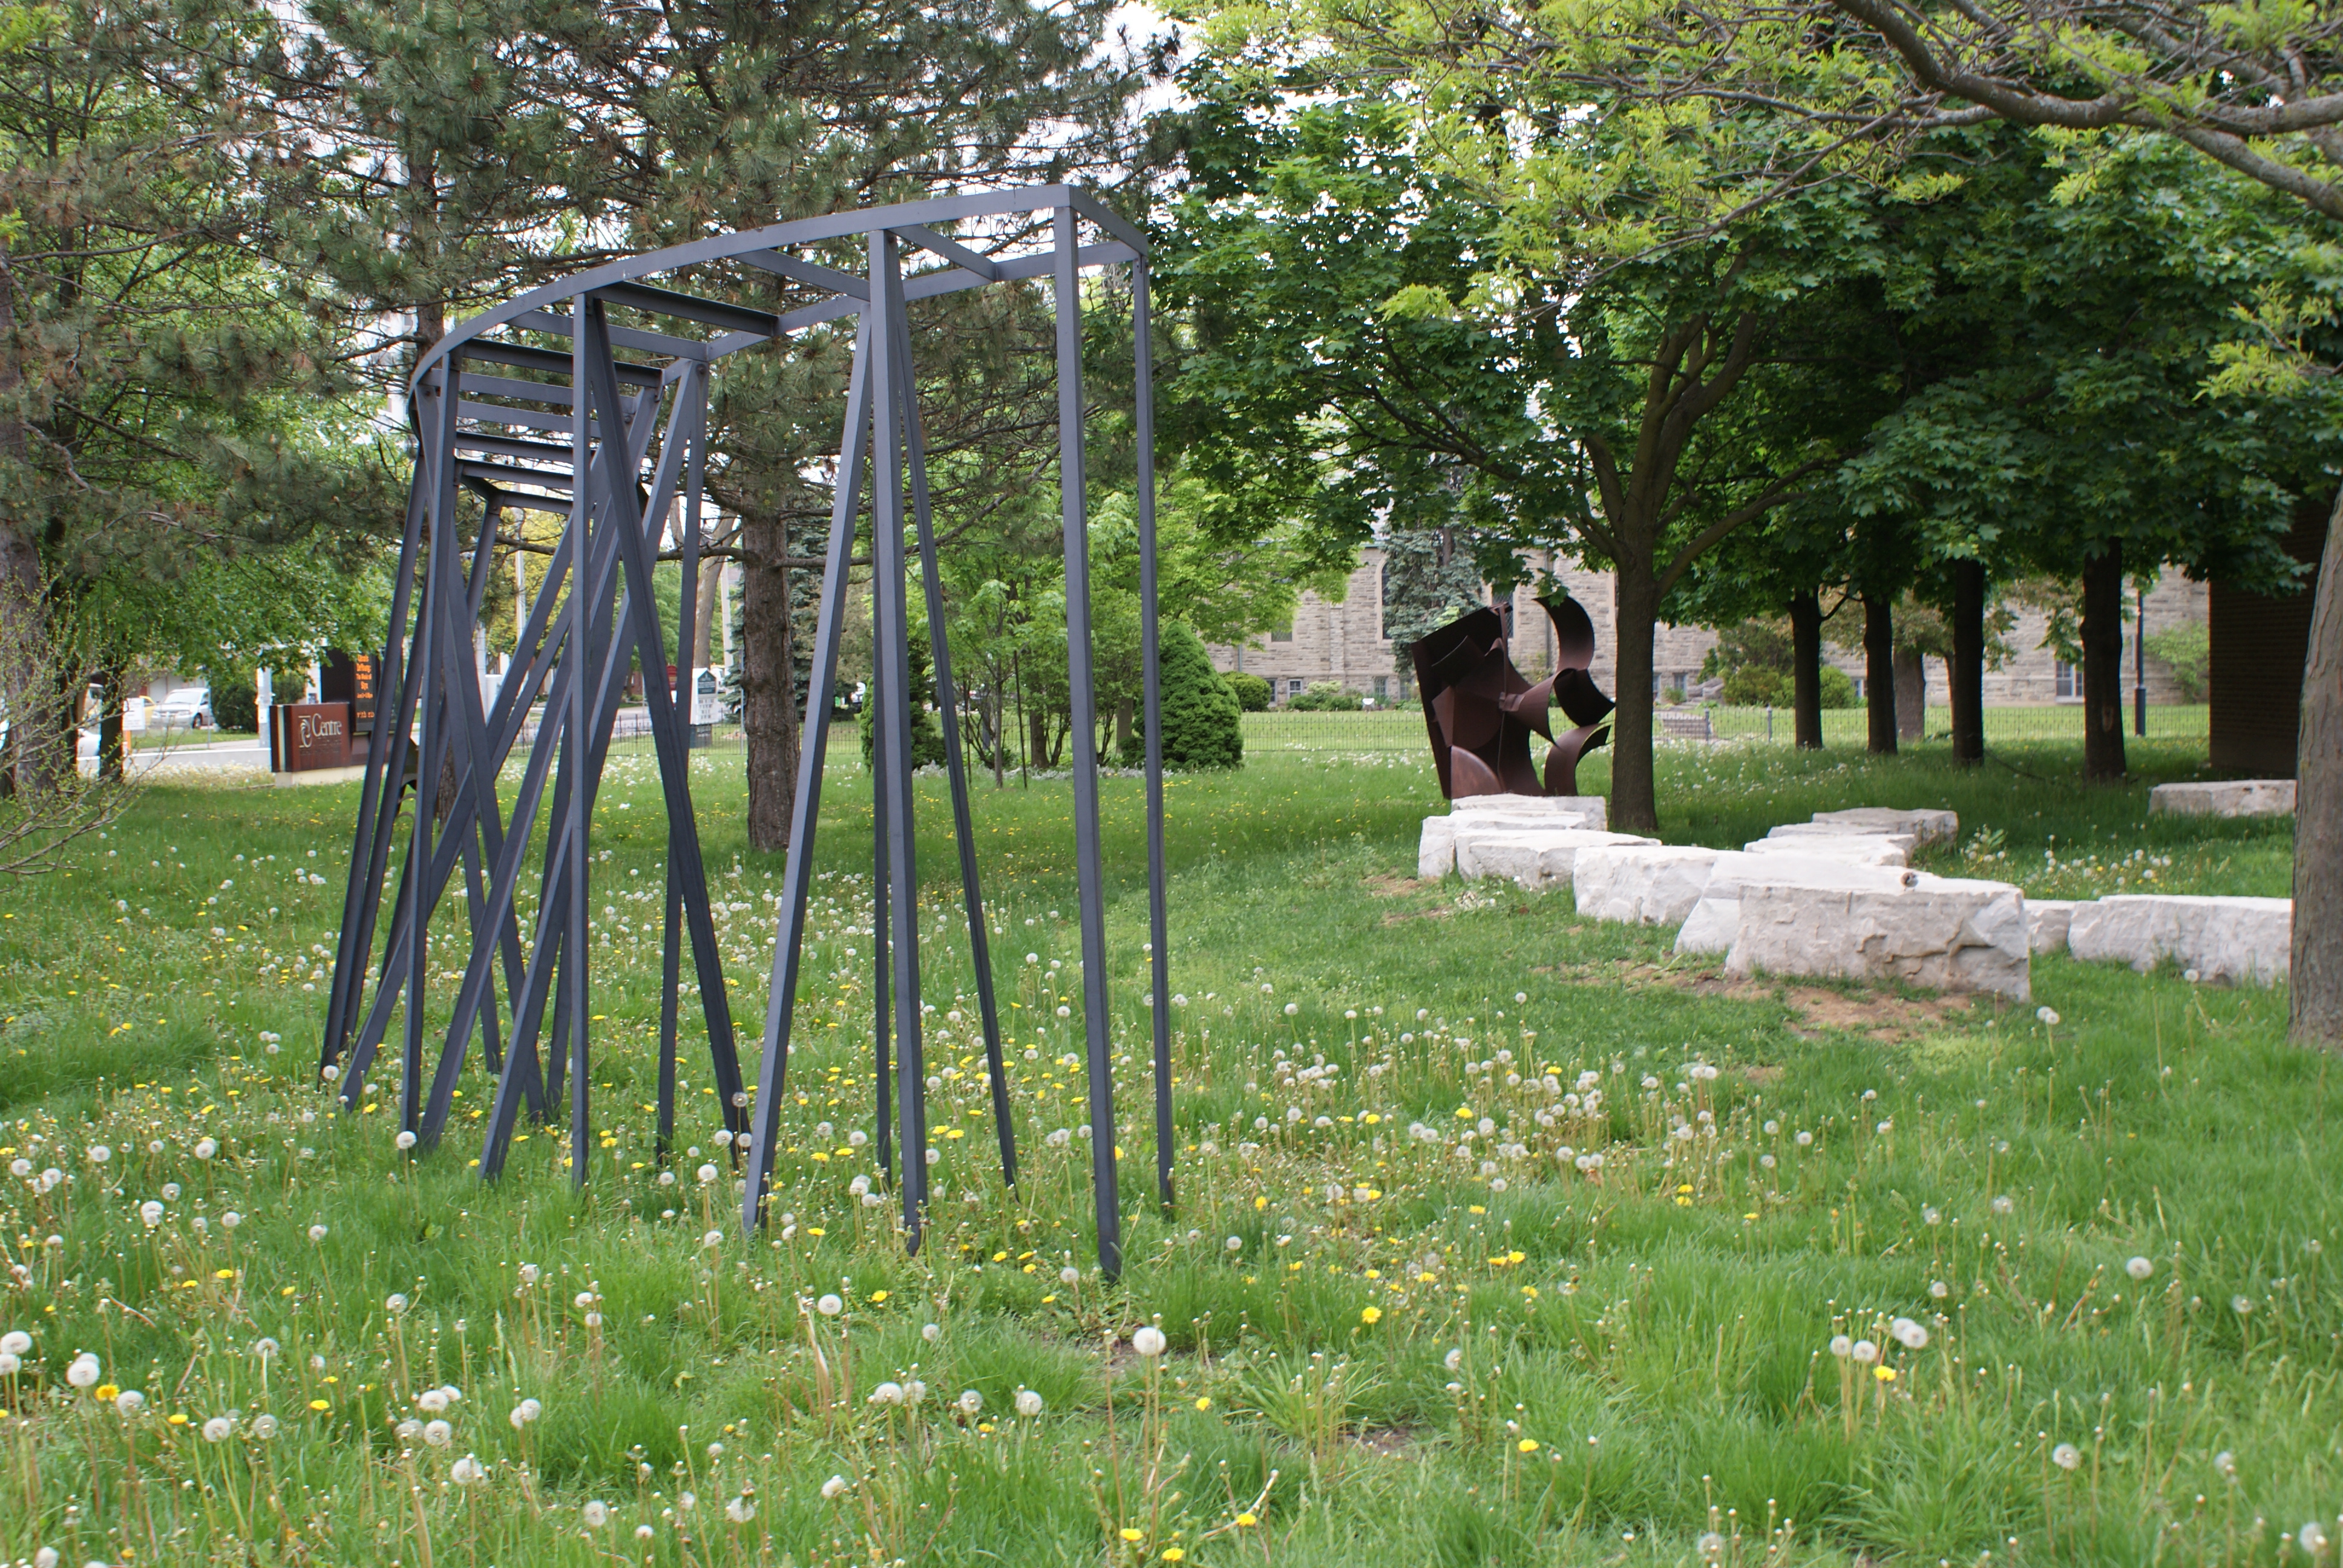 Photo of KWAG's sculpture garden featuring a large angular steel sculpture in the foreground of a grassy, tree-covered space